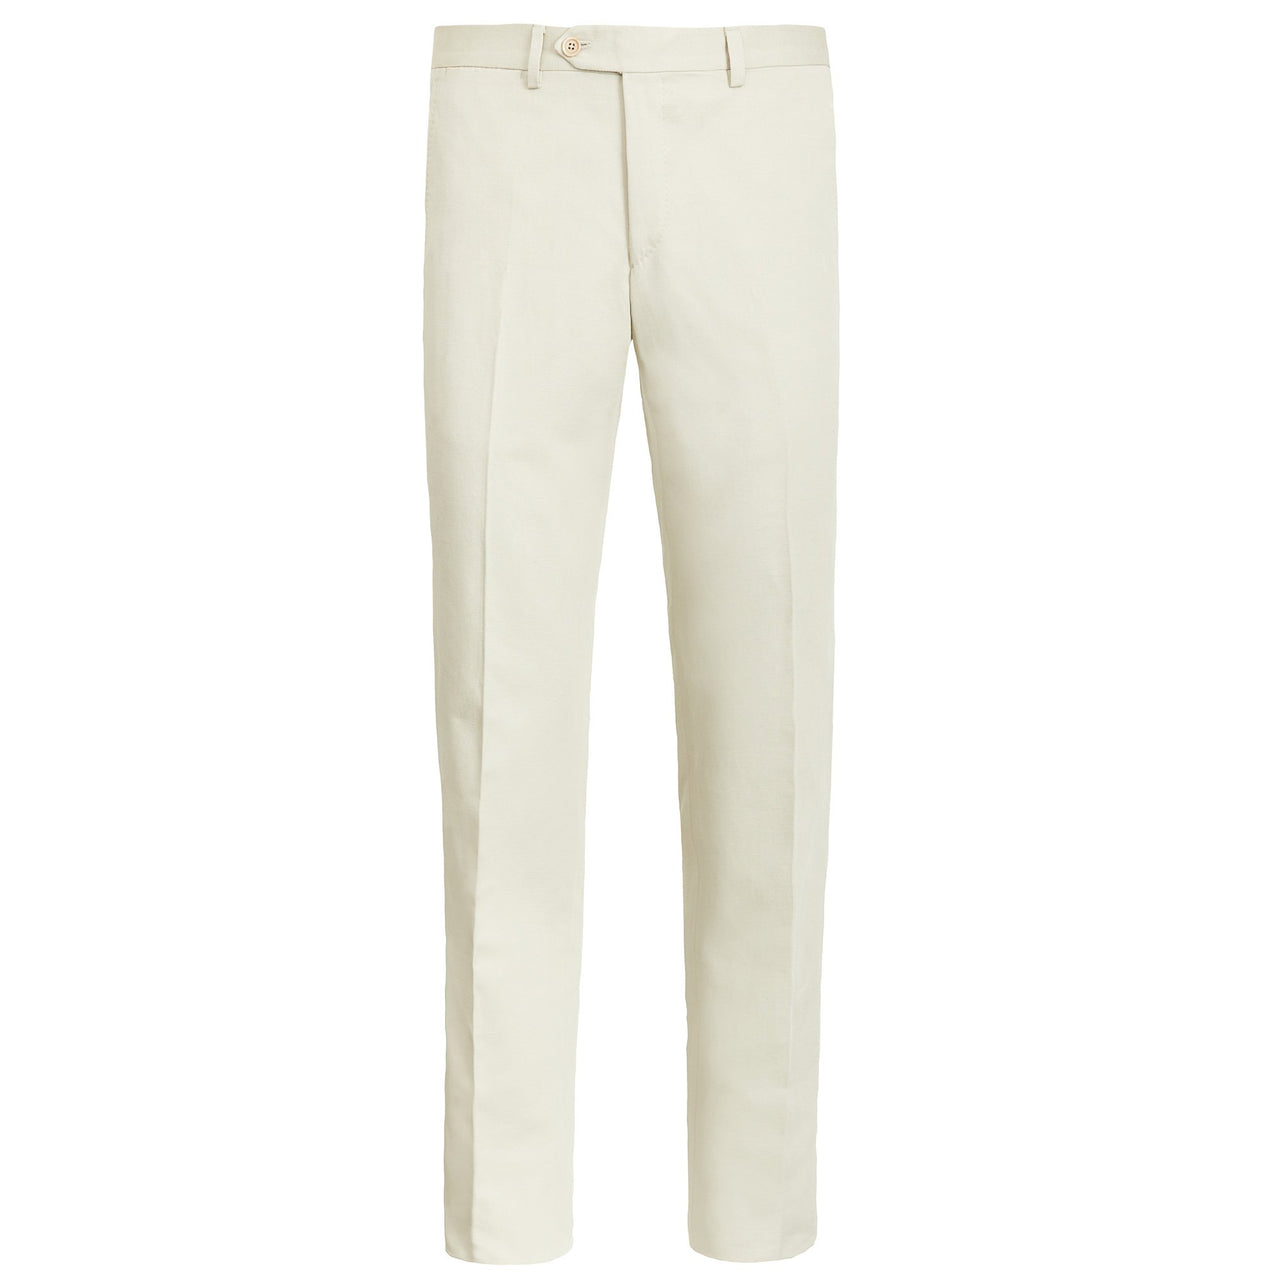 HENRY TAUPE TROUSER